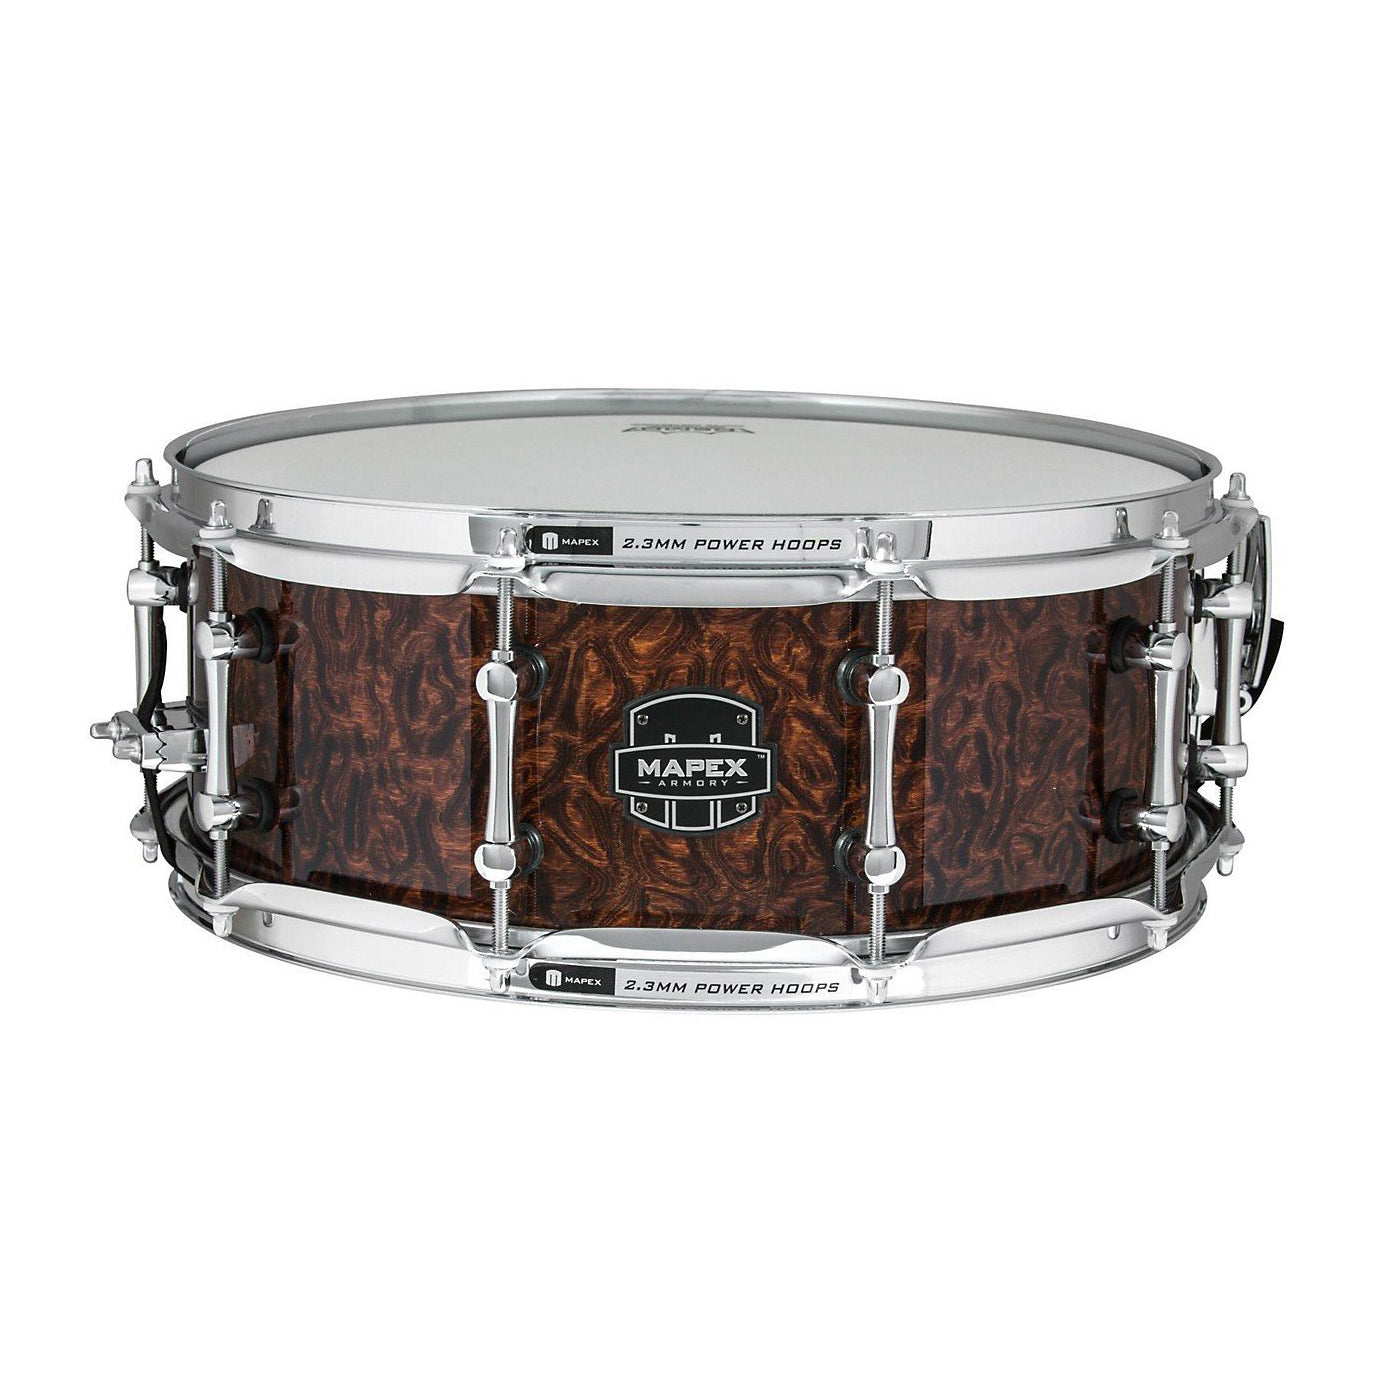 Mapex ARML4550KCWT The Dillinger Armory Series Snare Drum 14x5.5